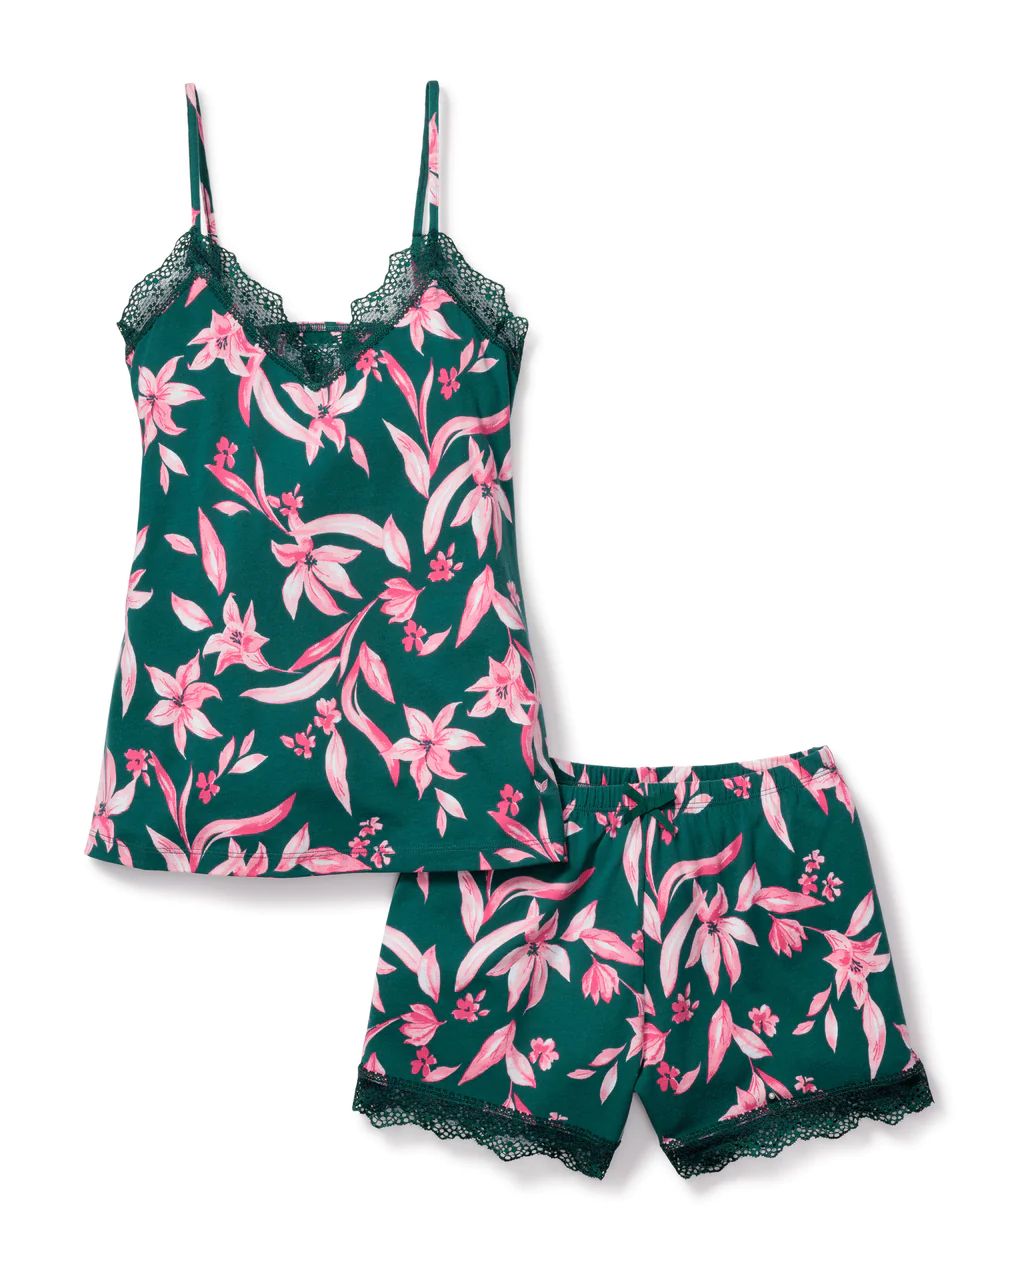 Women's Pima Cami Short Set with Lace in Amalfi Floral | Petite Plume